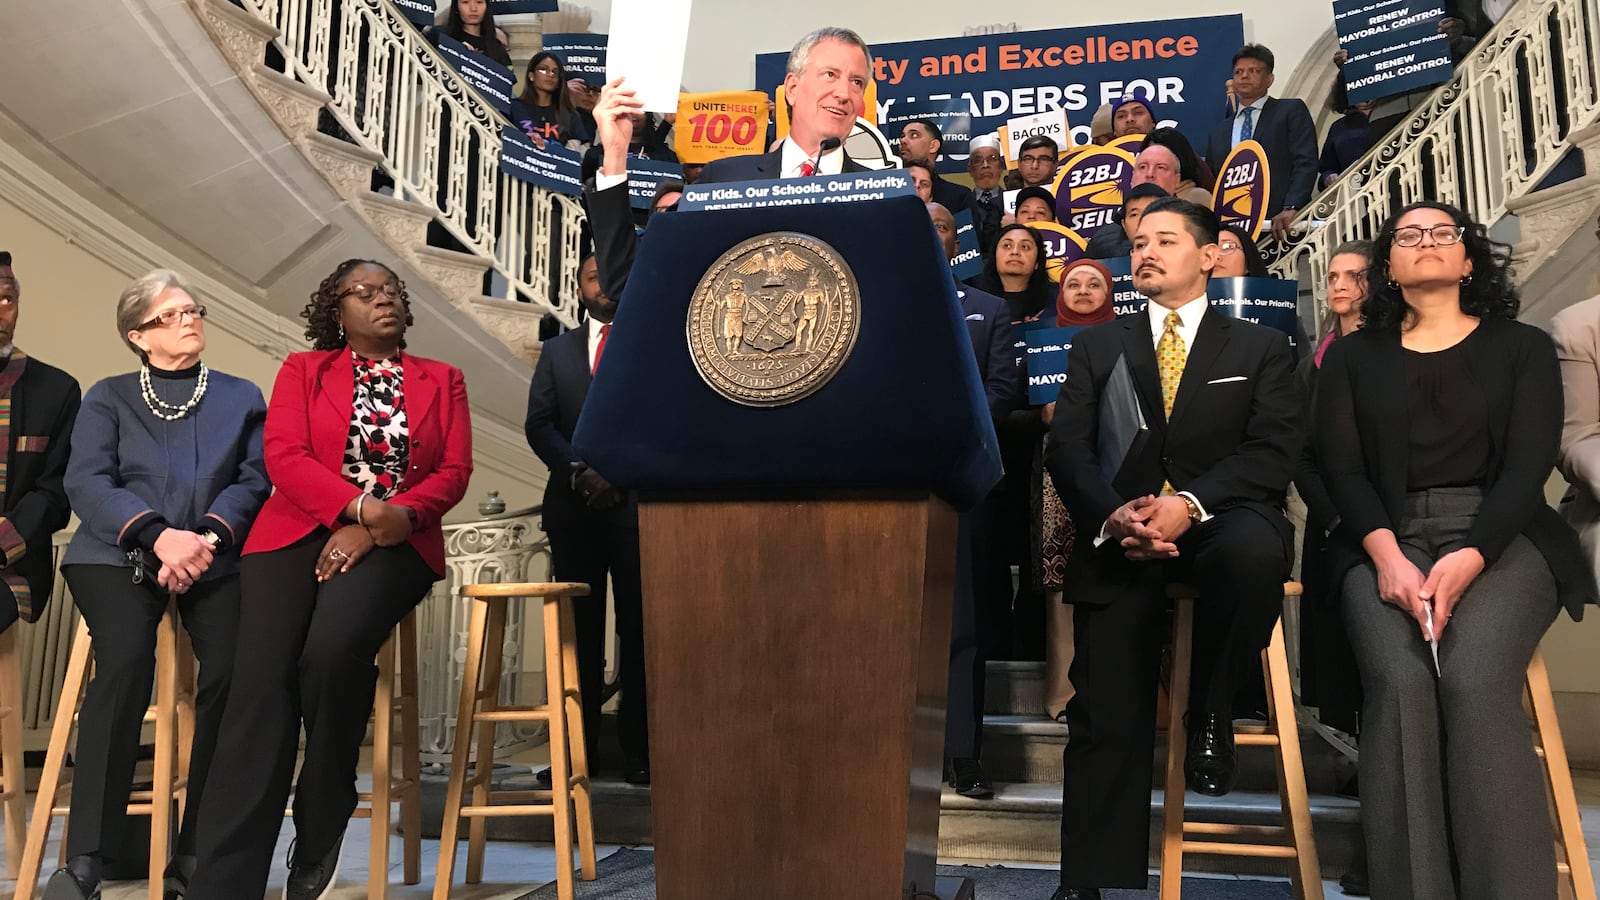 During a rally at City Hall, Mayor Bill de Blasio holds up a letter of support from labor leaders on extending mayoral control of schools.